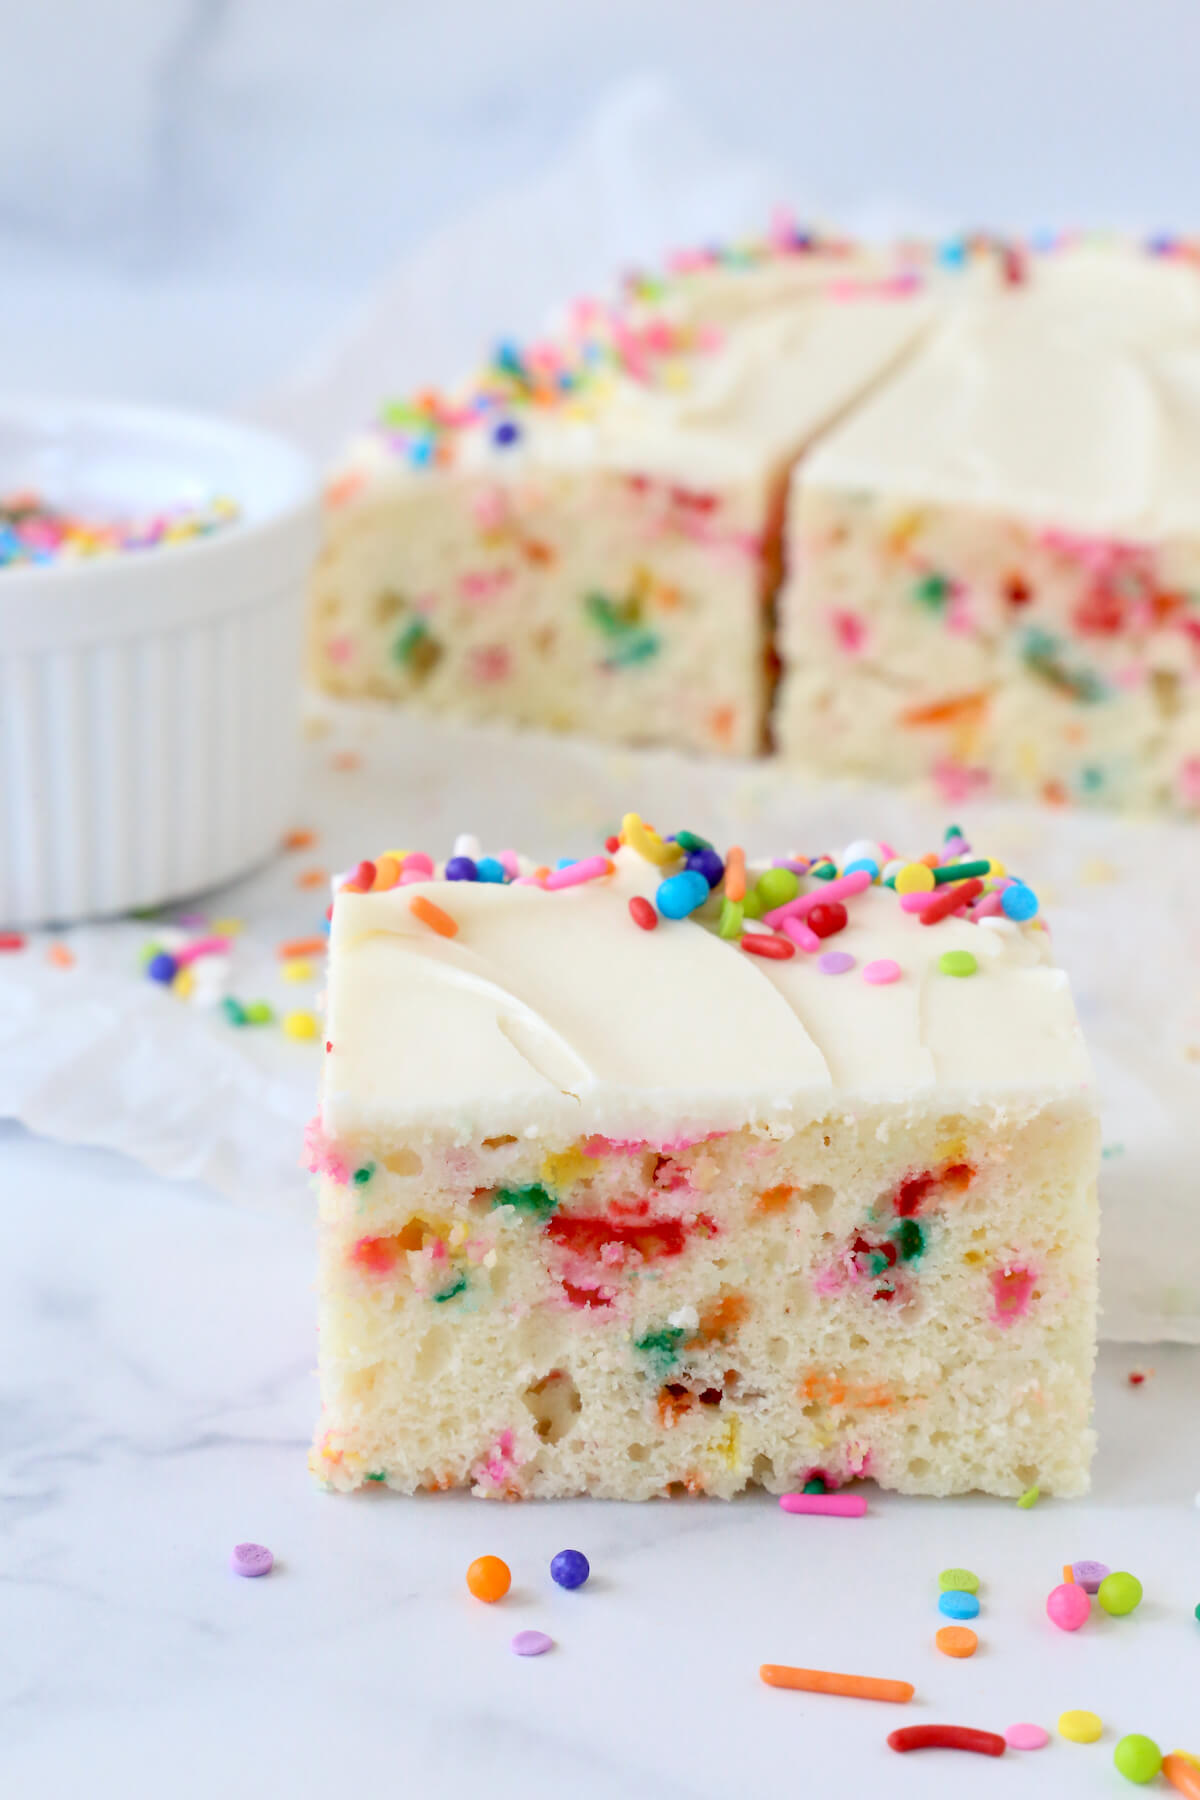 A slice of white cake with rainbow sprinkles.